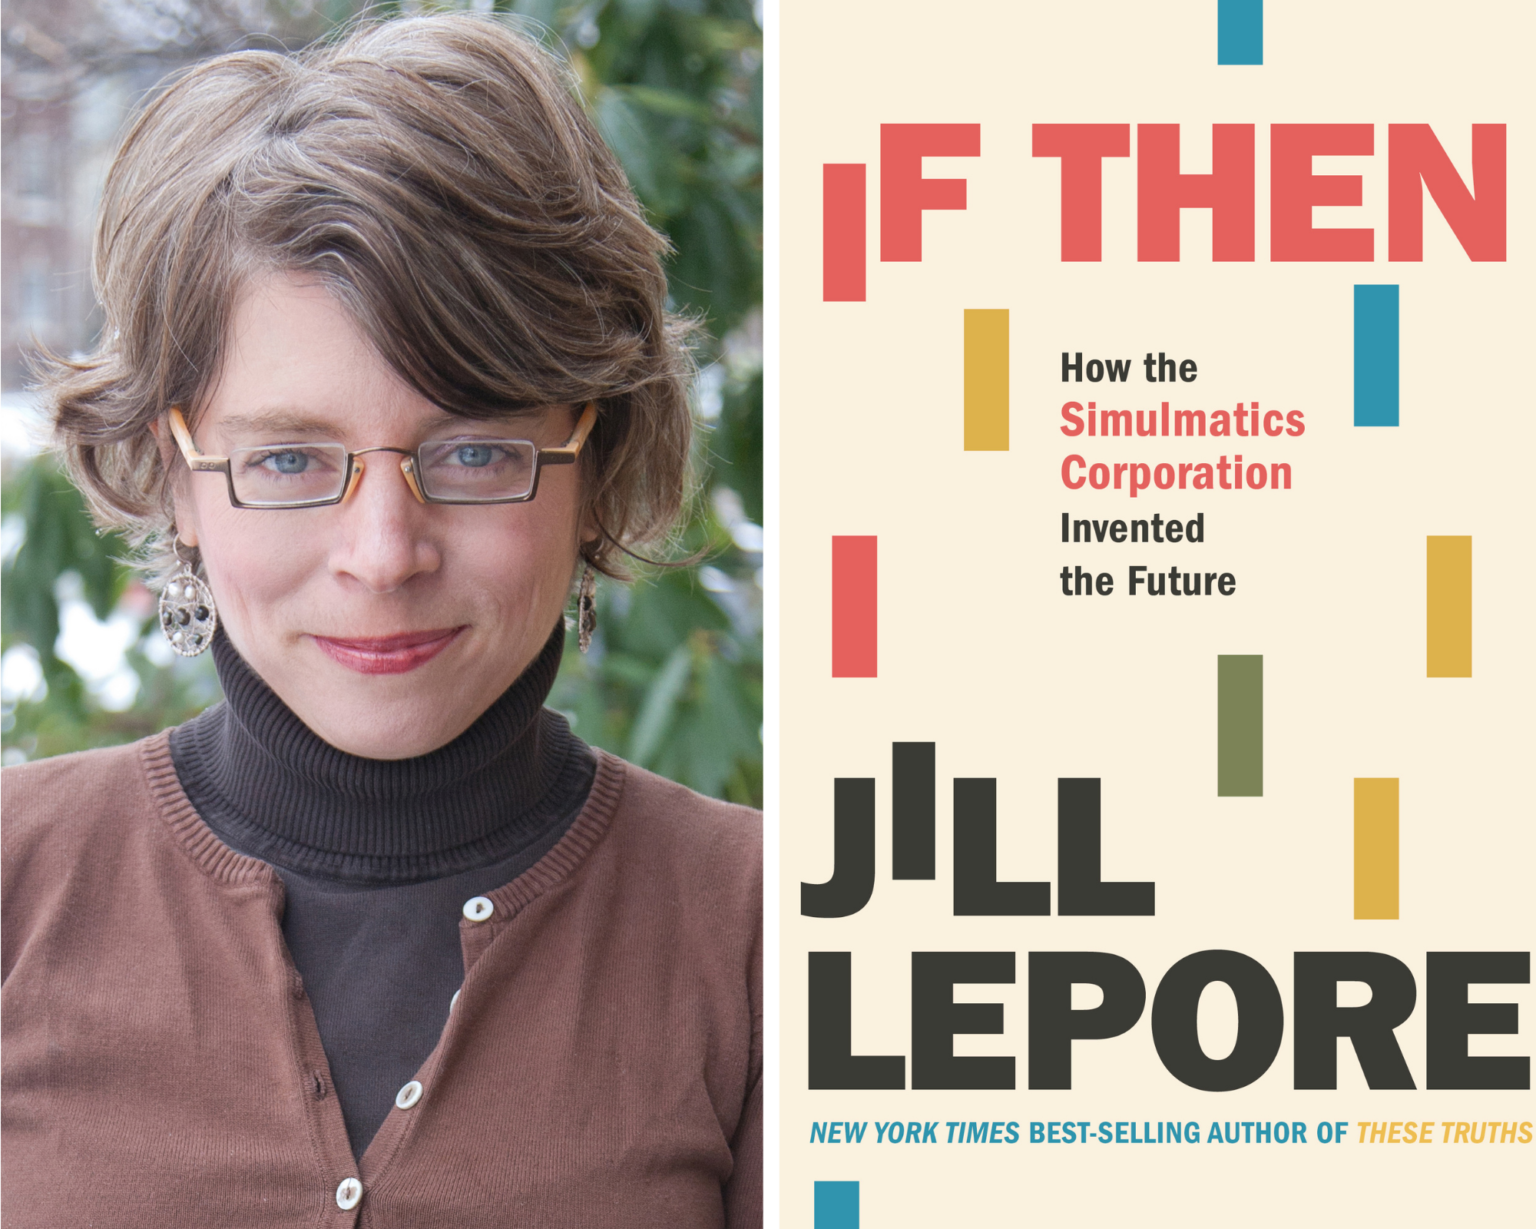 Historian, Harvard professor and author of "If Then - How the Simulmatics Corporation Invented the Future" Jill Lepore